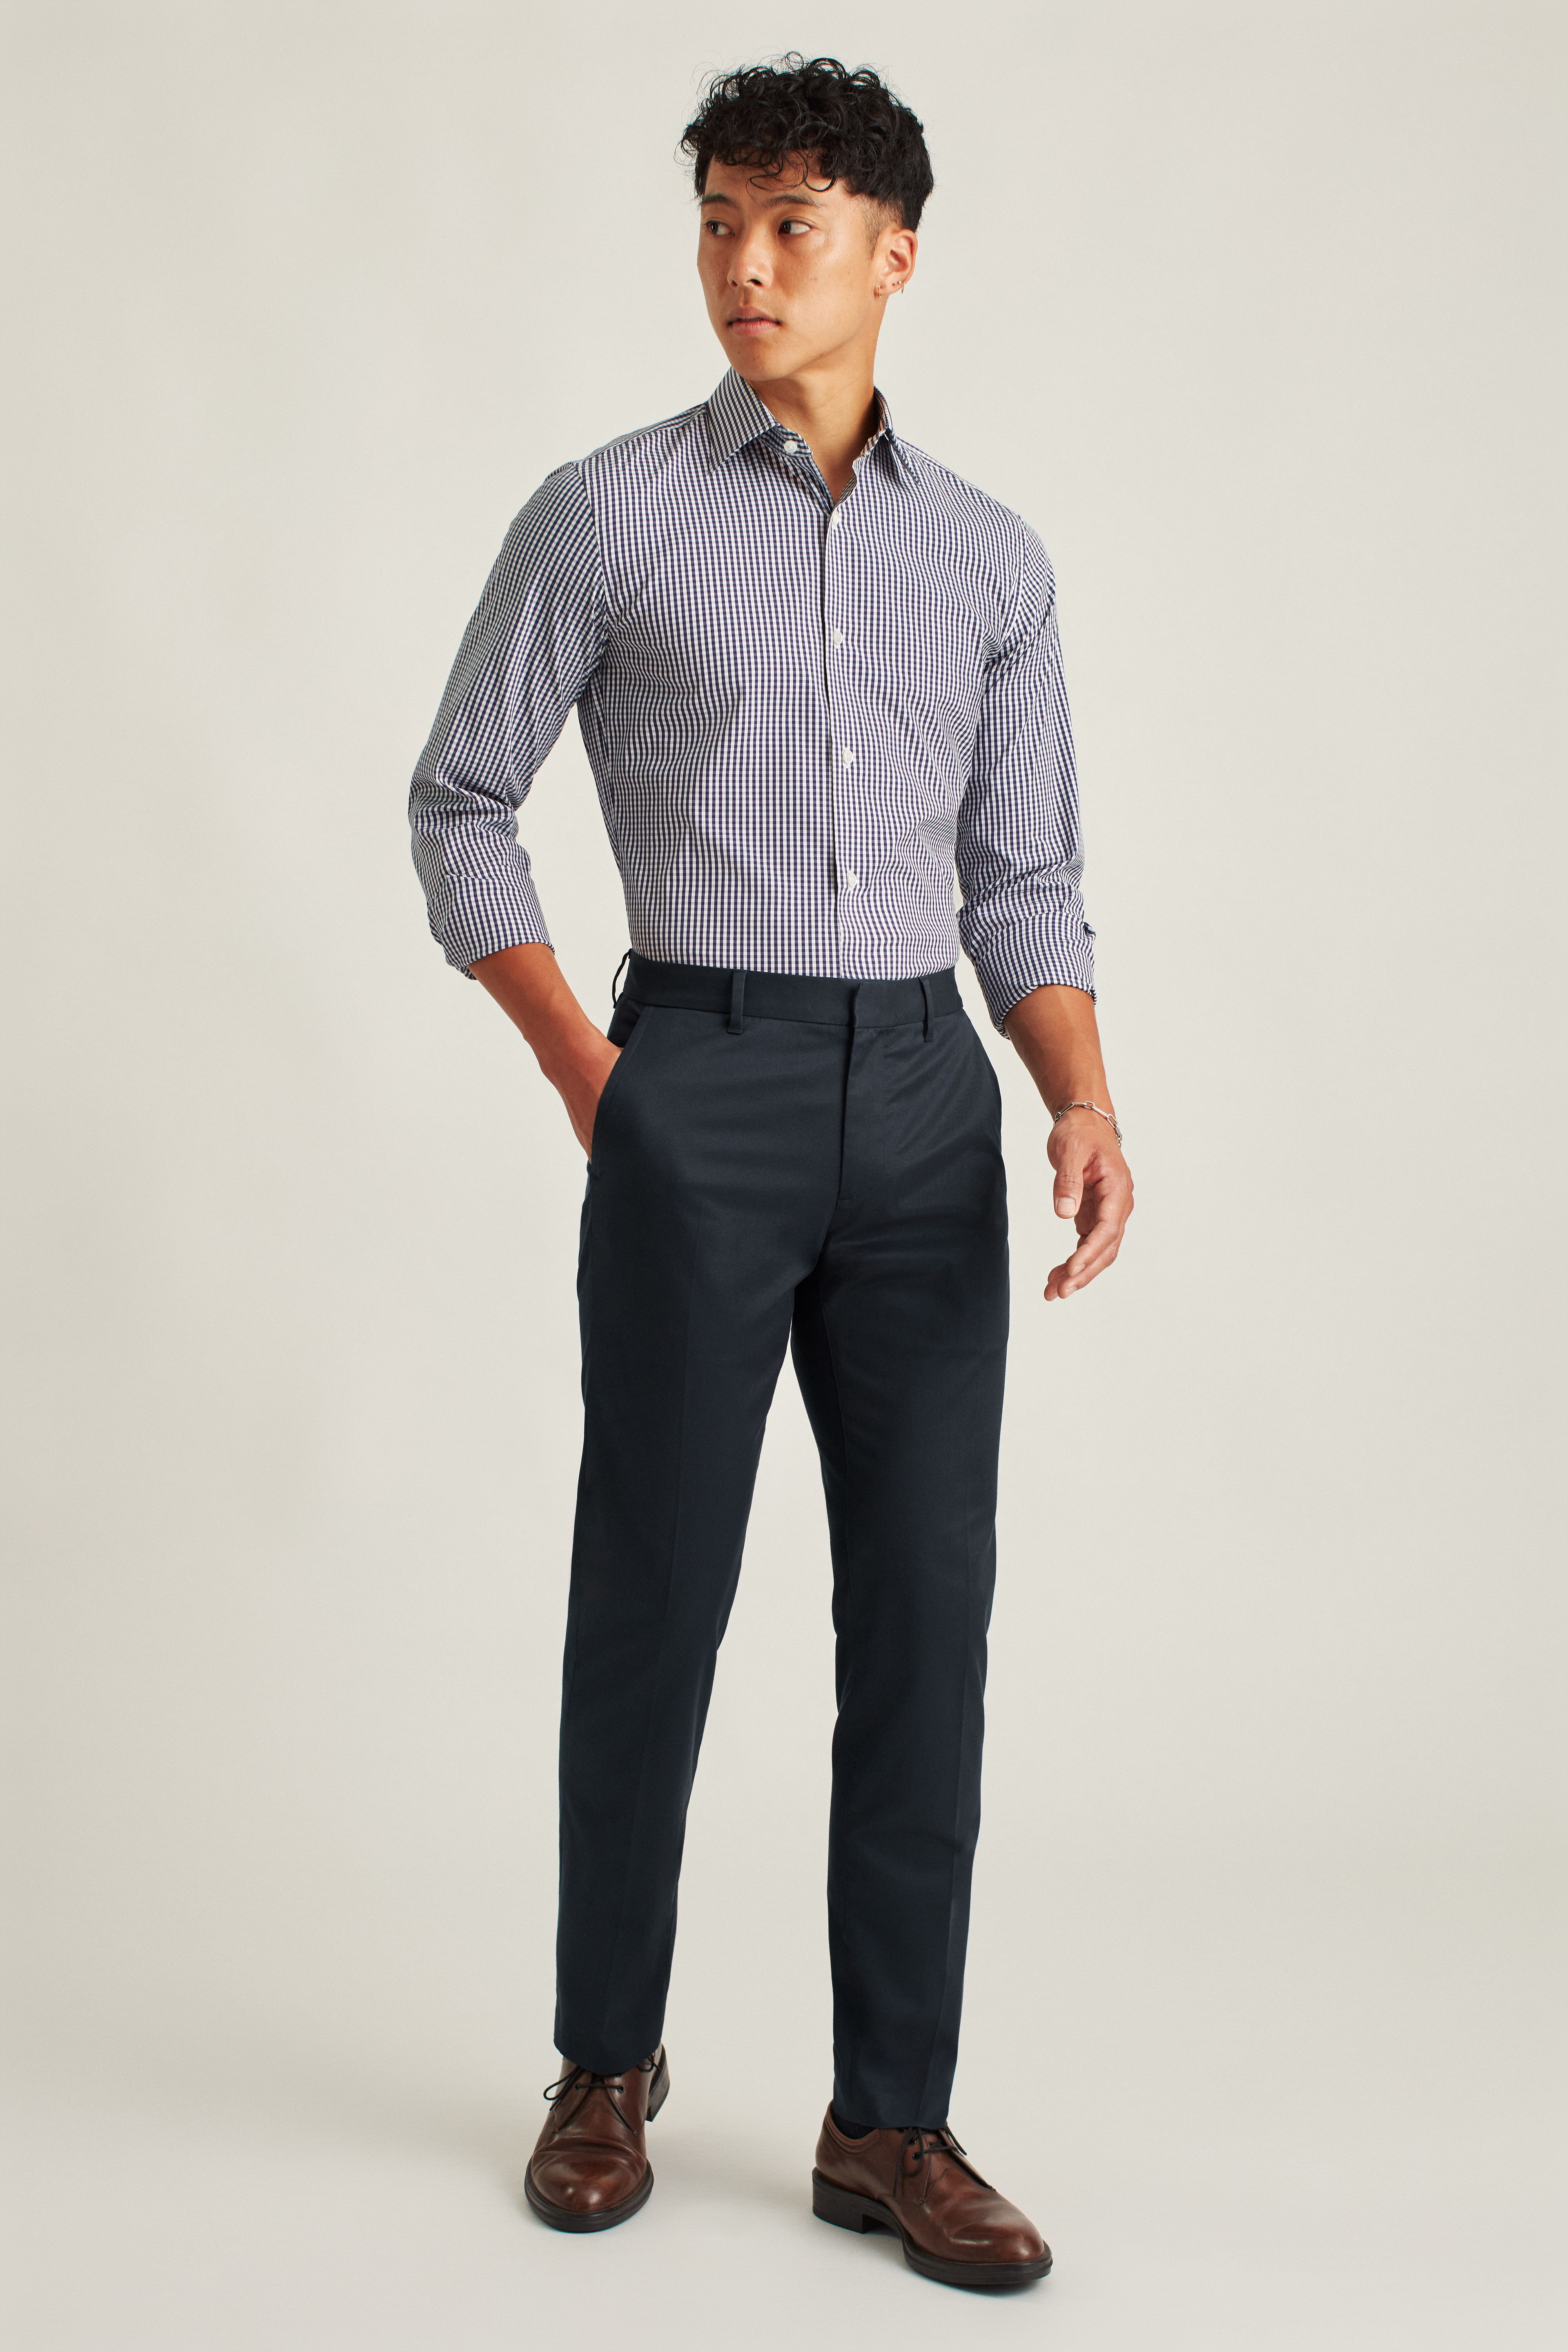 Chinos vs Dress Pants: What's the Difference?